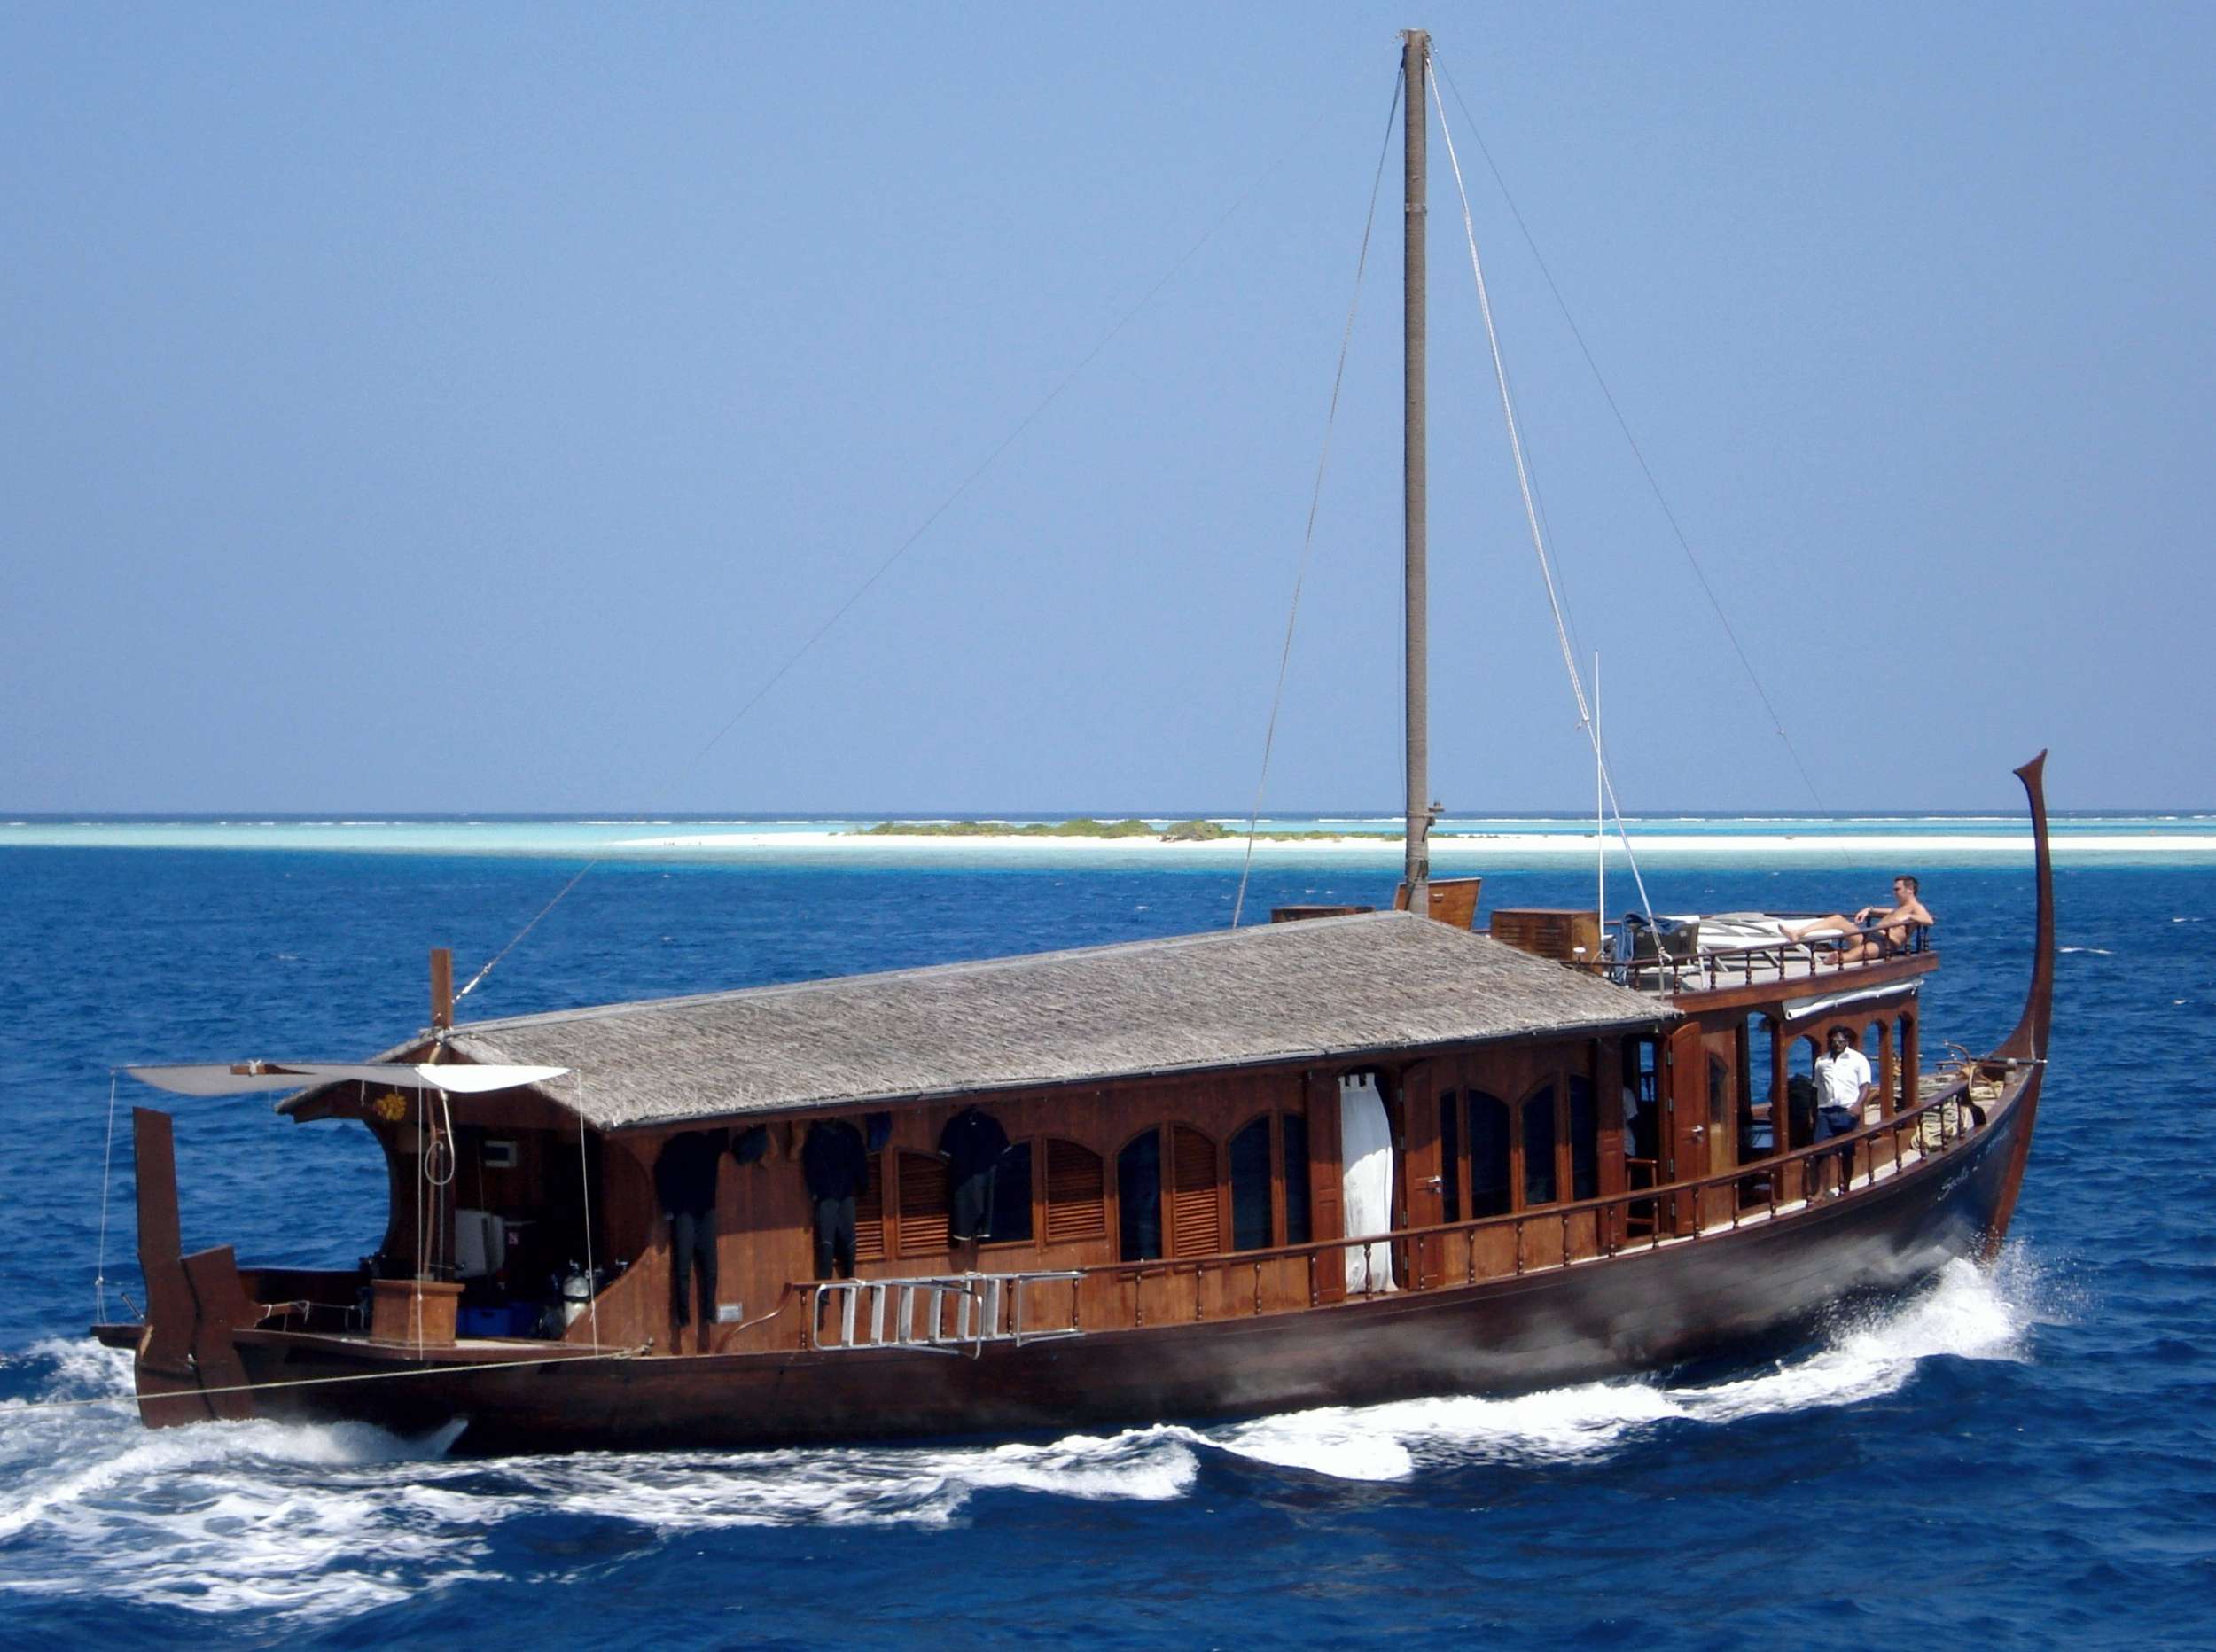 DHONI STELLA 2 - Yacht Charter Maldives & Boat hire in Indian Ocean & SE Asia 1